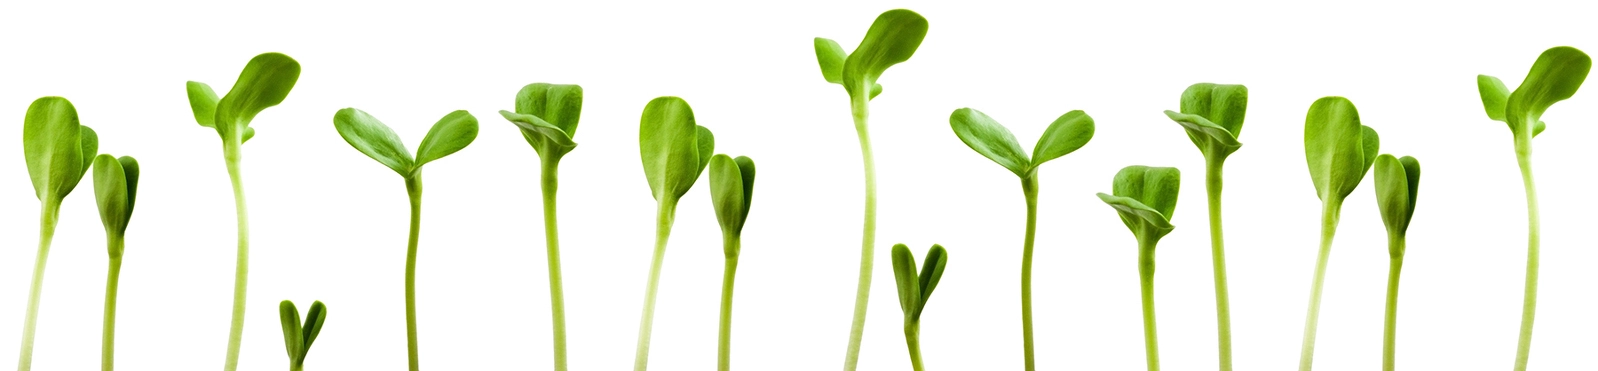 Seedlings against a white background